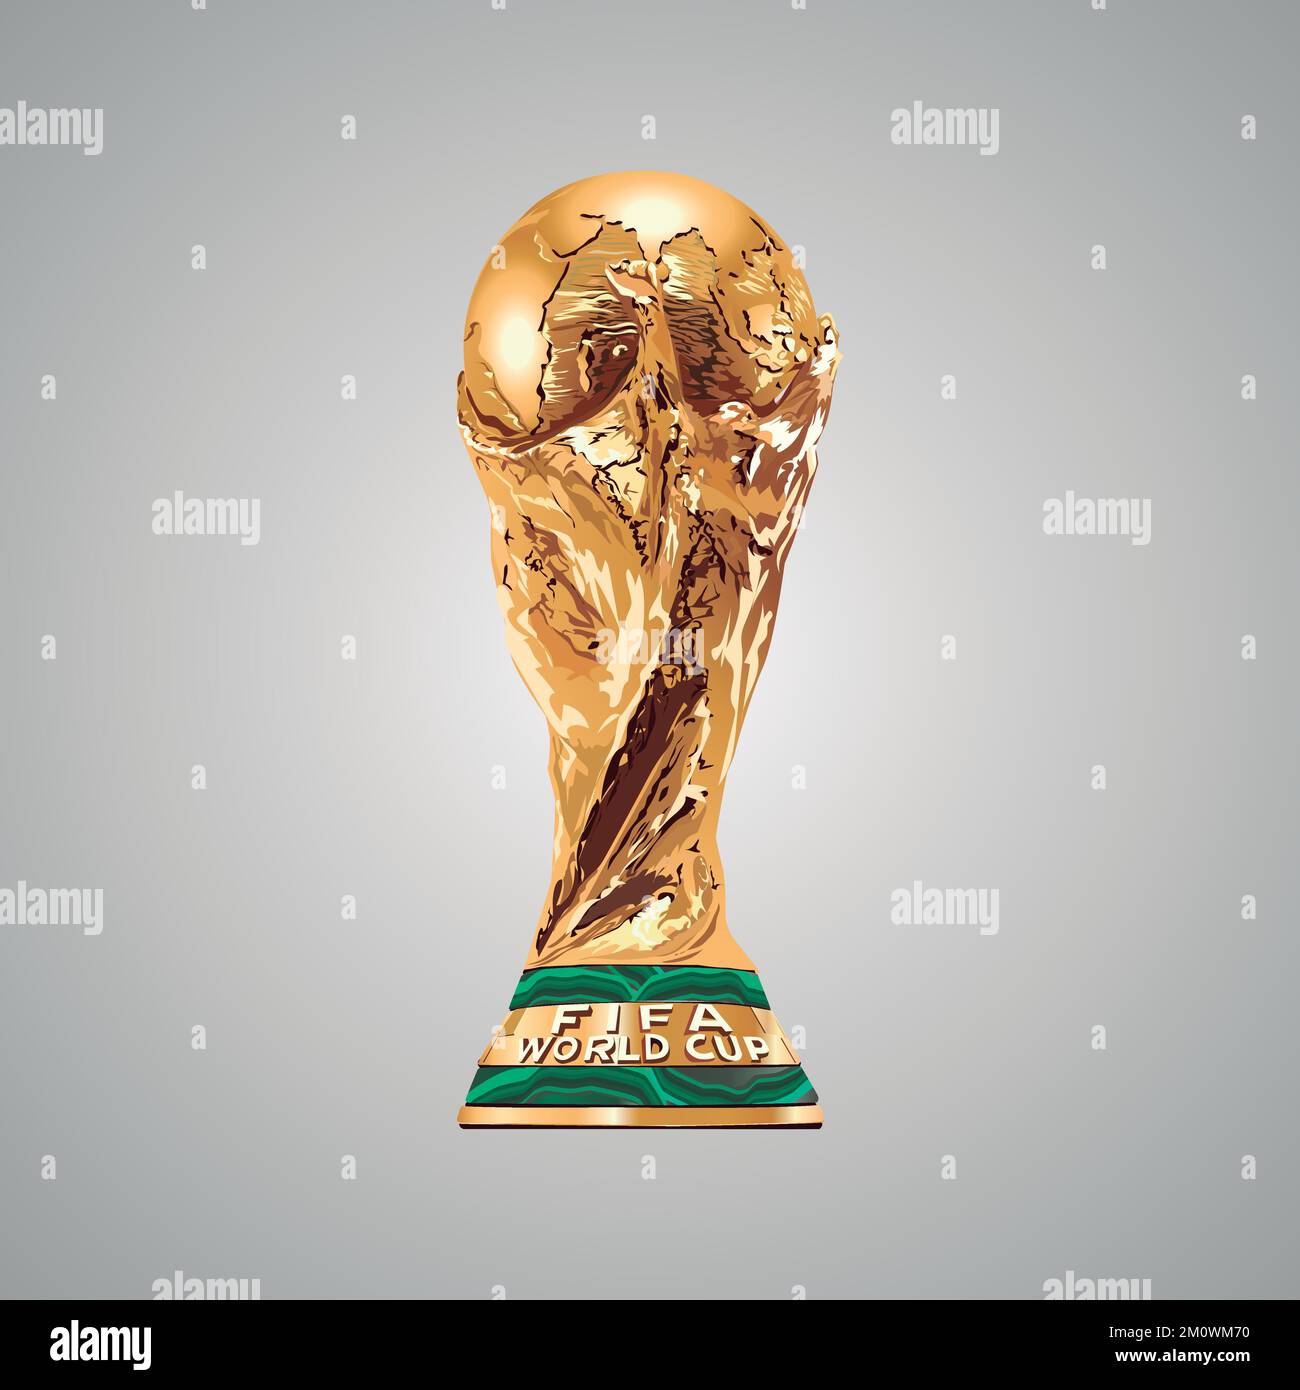 100,000 World cup 2022 Vector Images